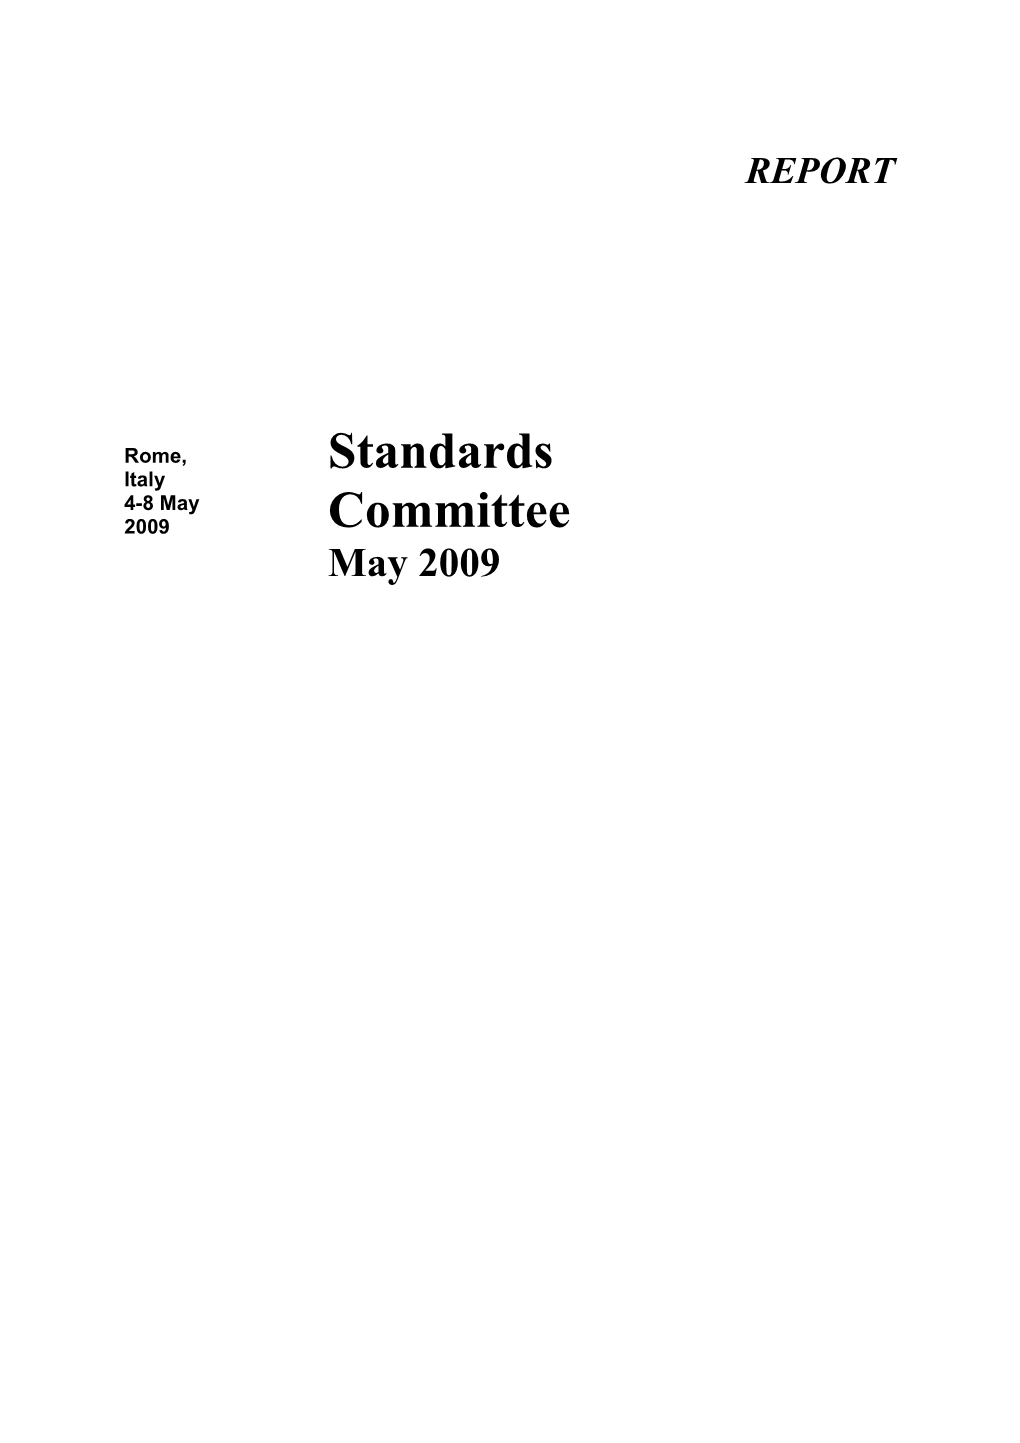 Report of the Standards Committee May 2009